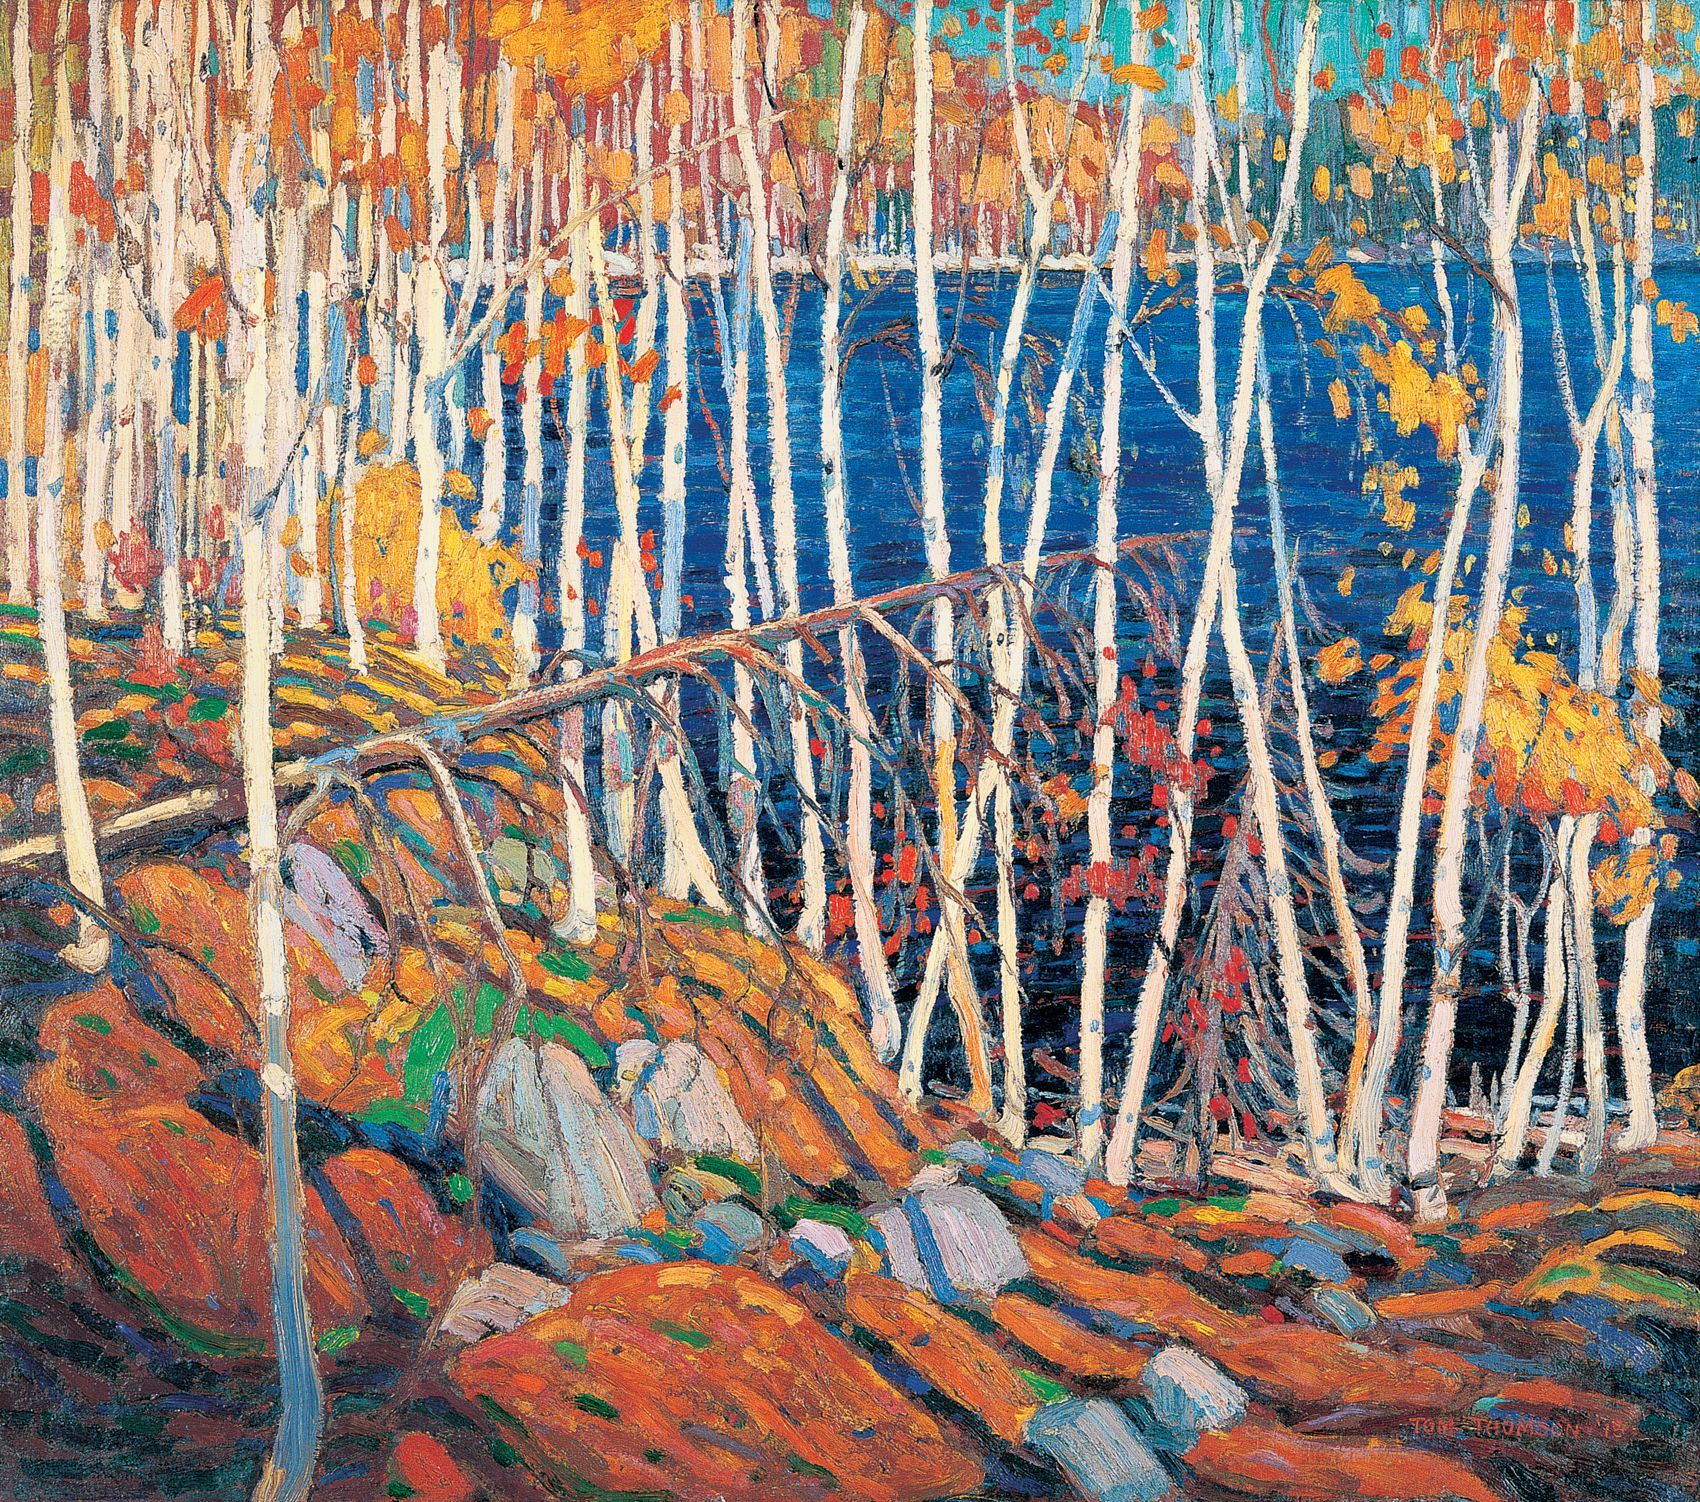 Painting - In the Northland by Tom Thomson (1915)